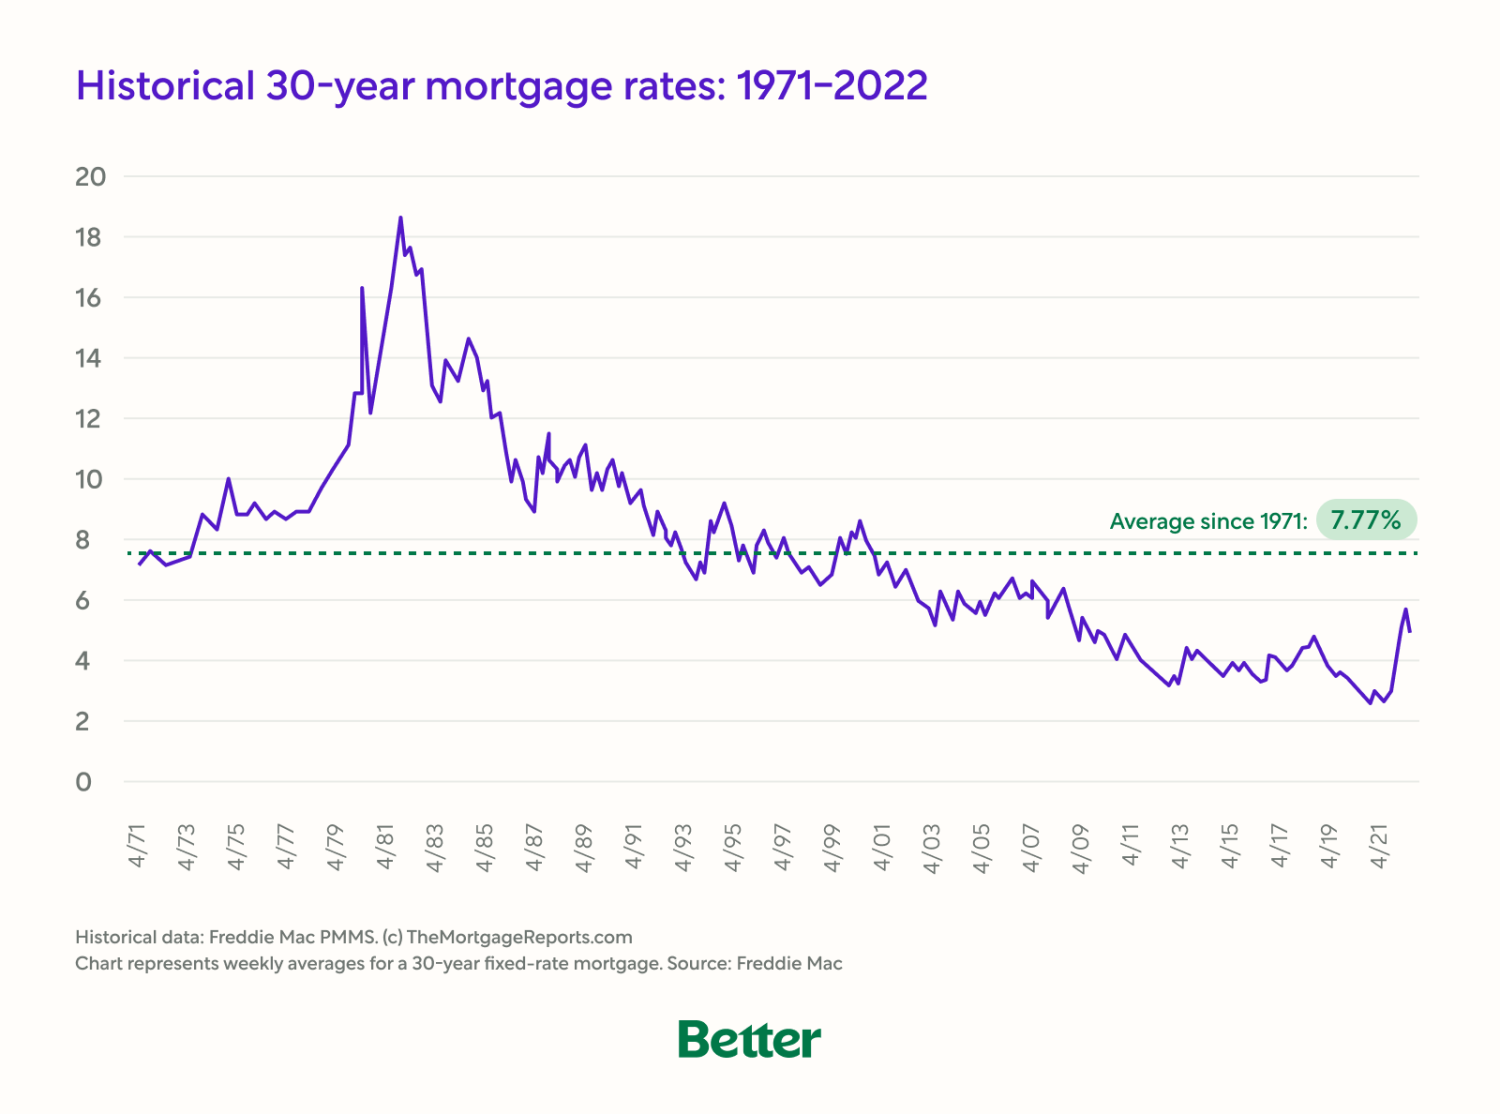 Line Graph of Historical 30 Year Mortgage Rates: 1971-2022 - Source: Freddie Mac